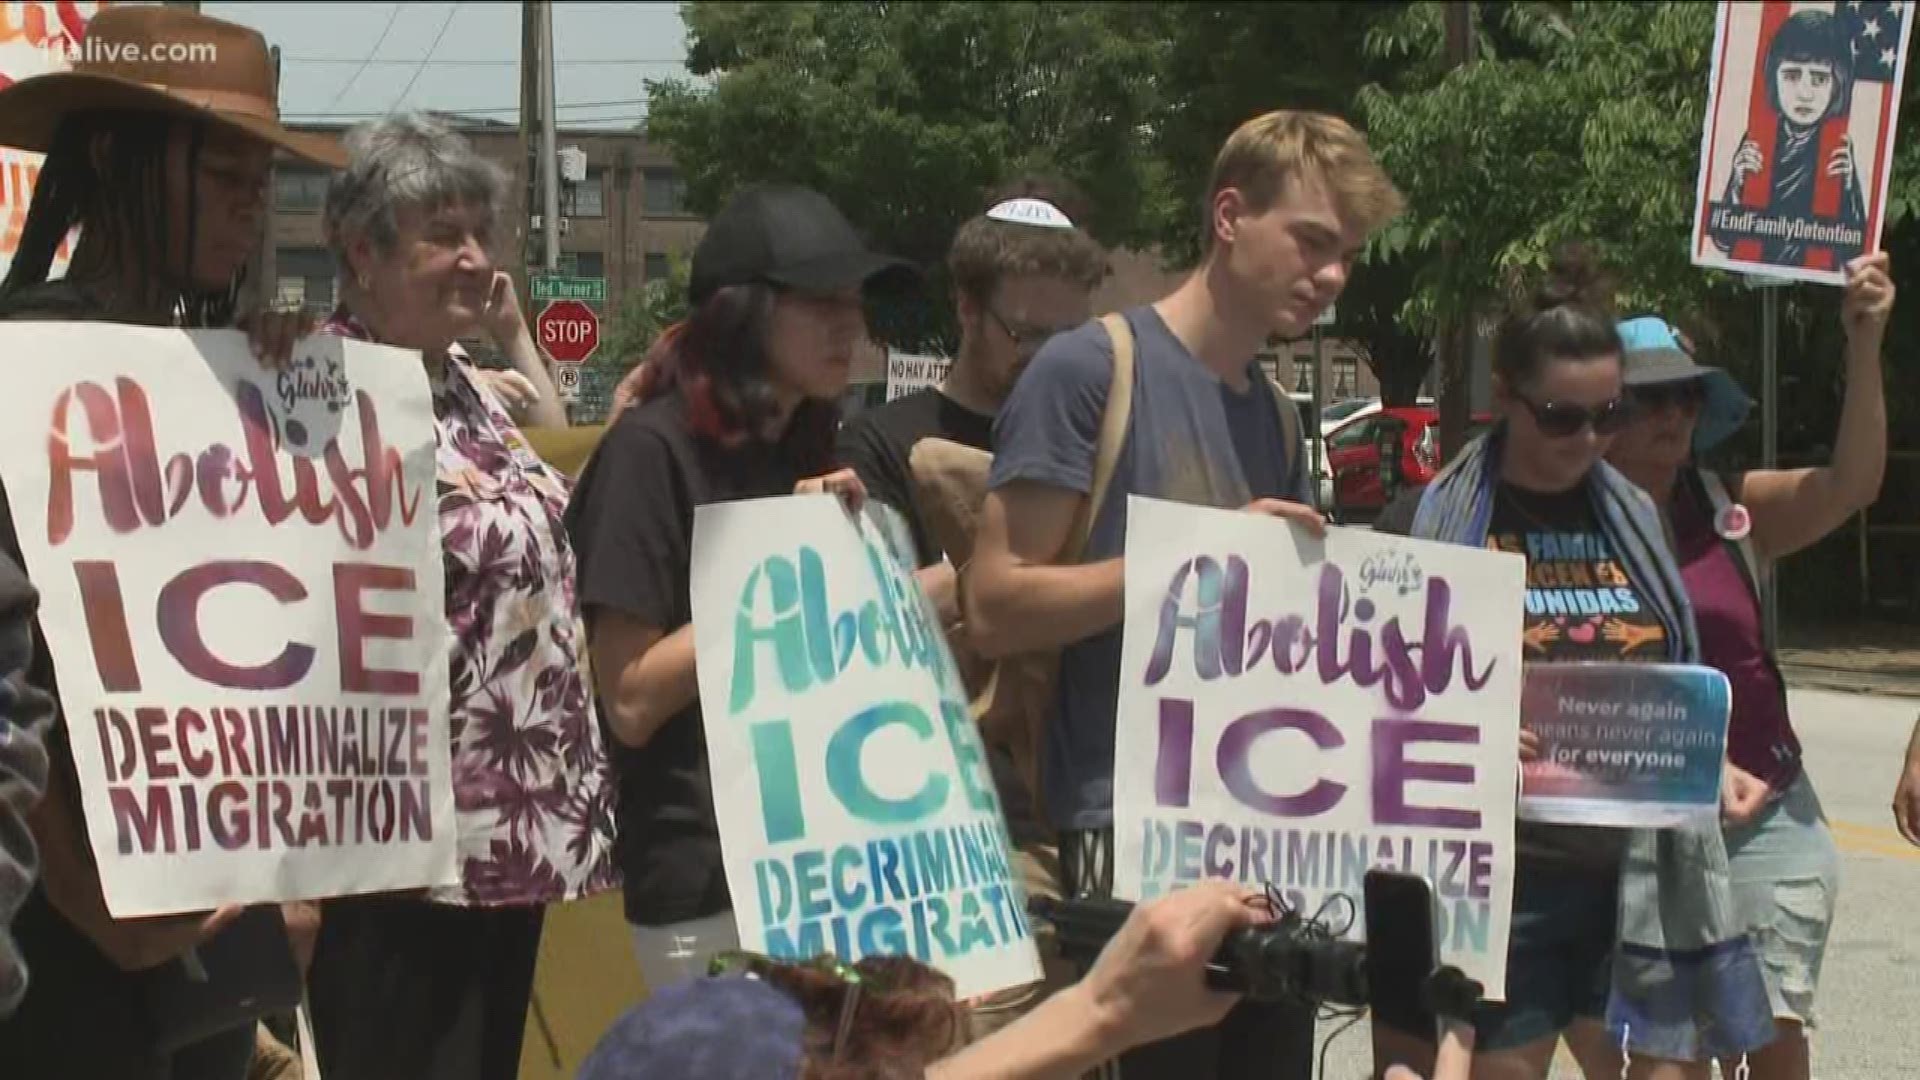 A protest was held outside of the ICE office in Atlanta.